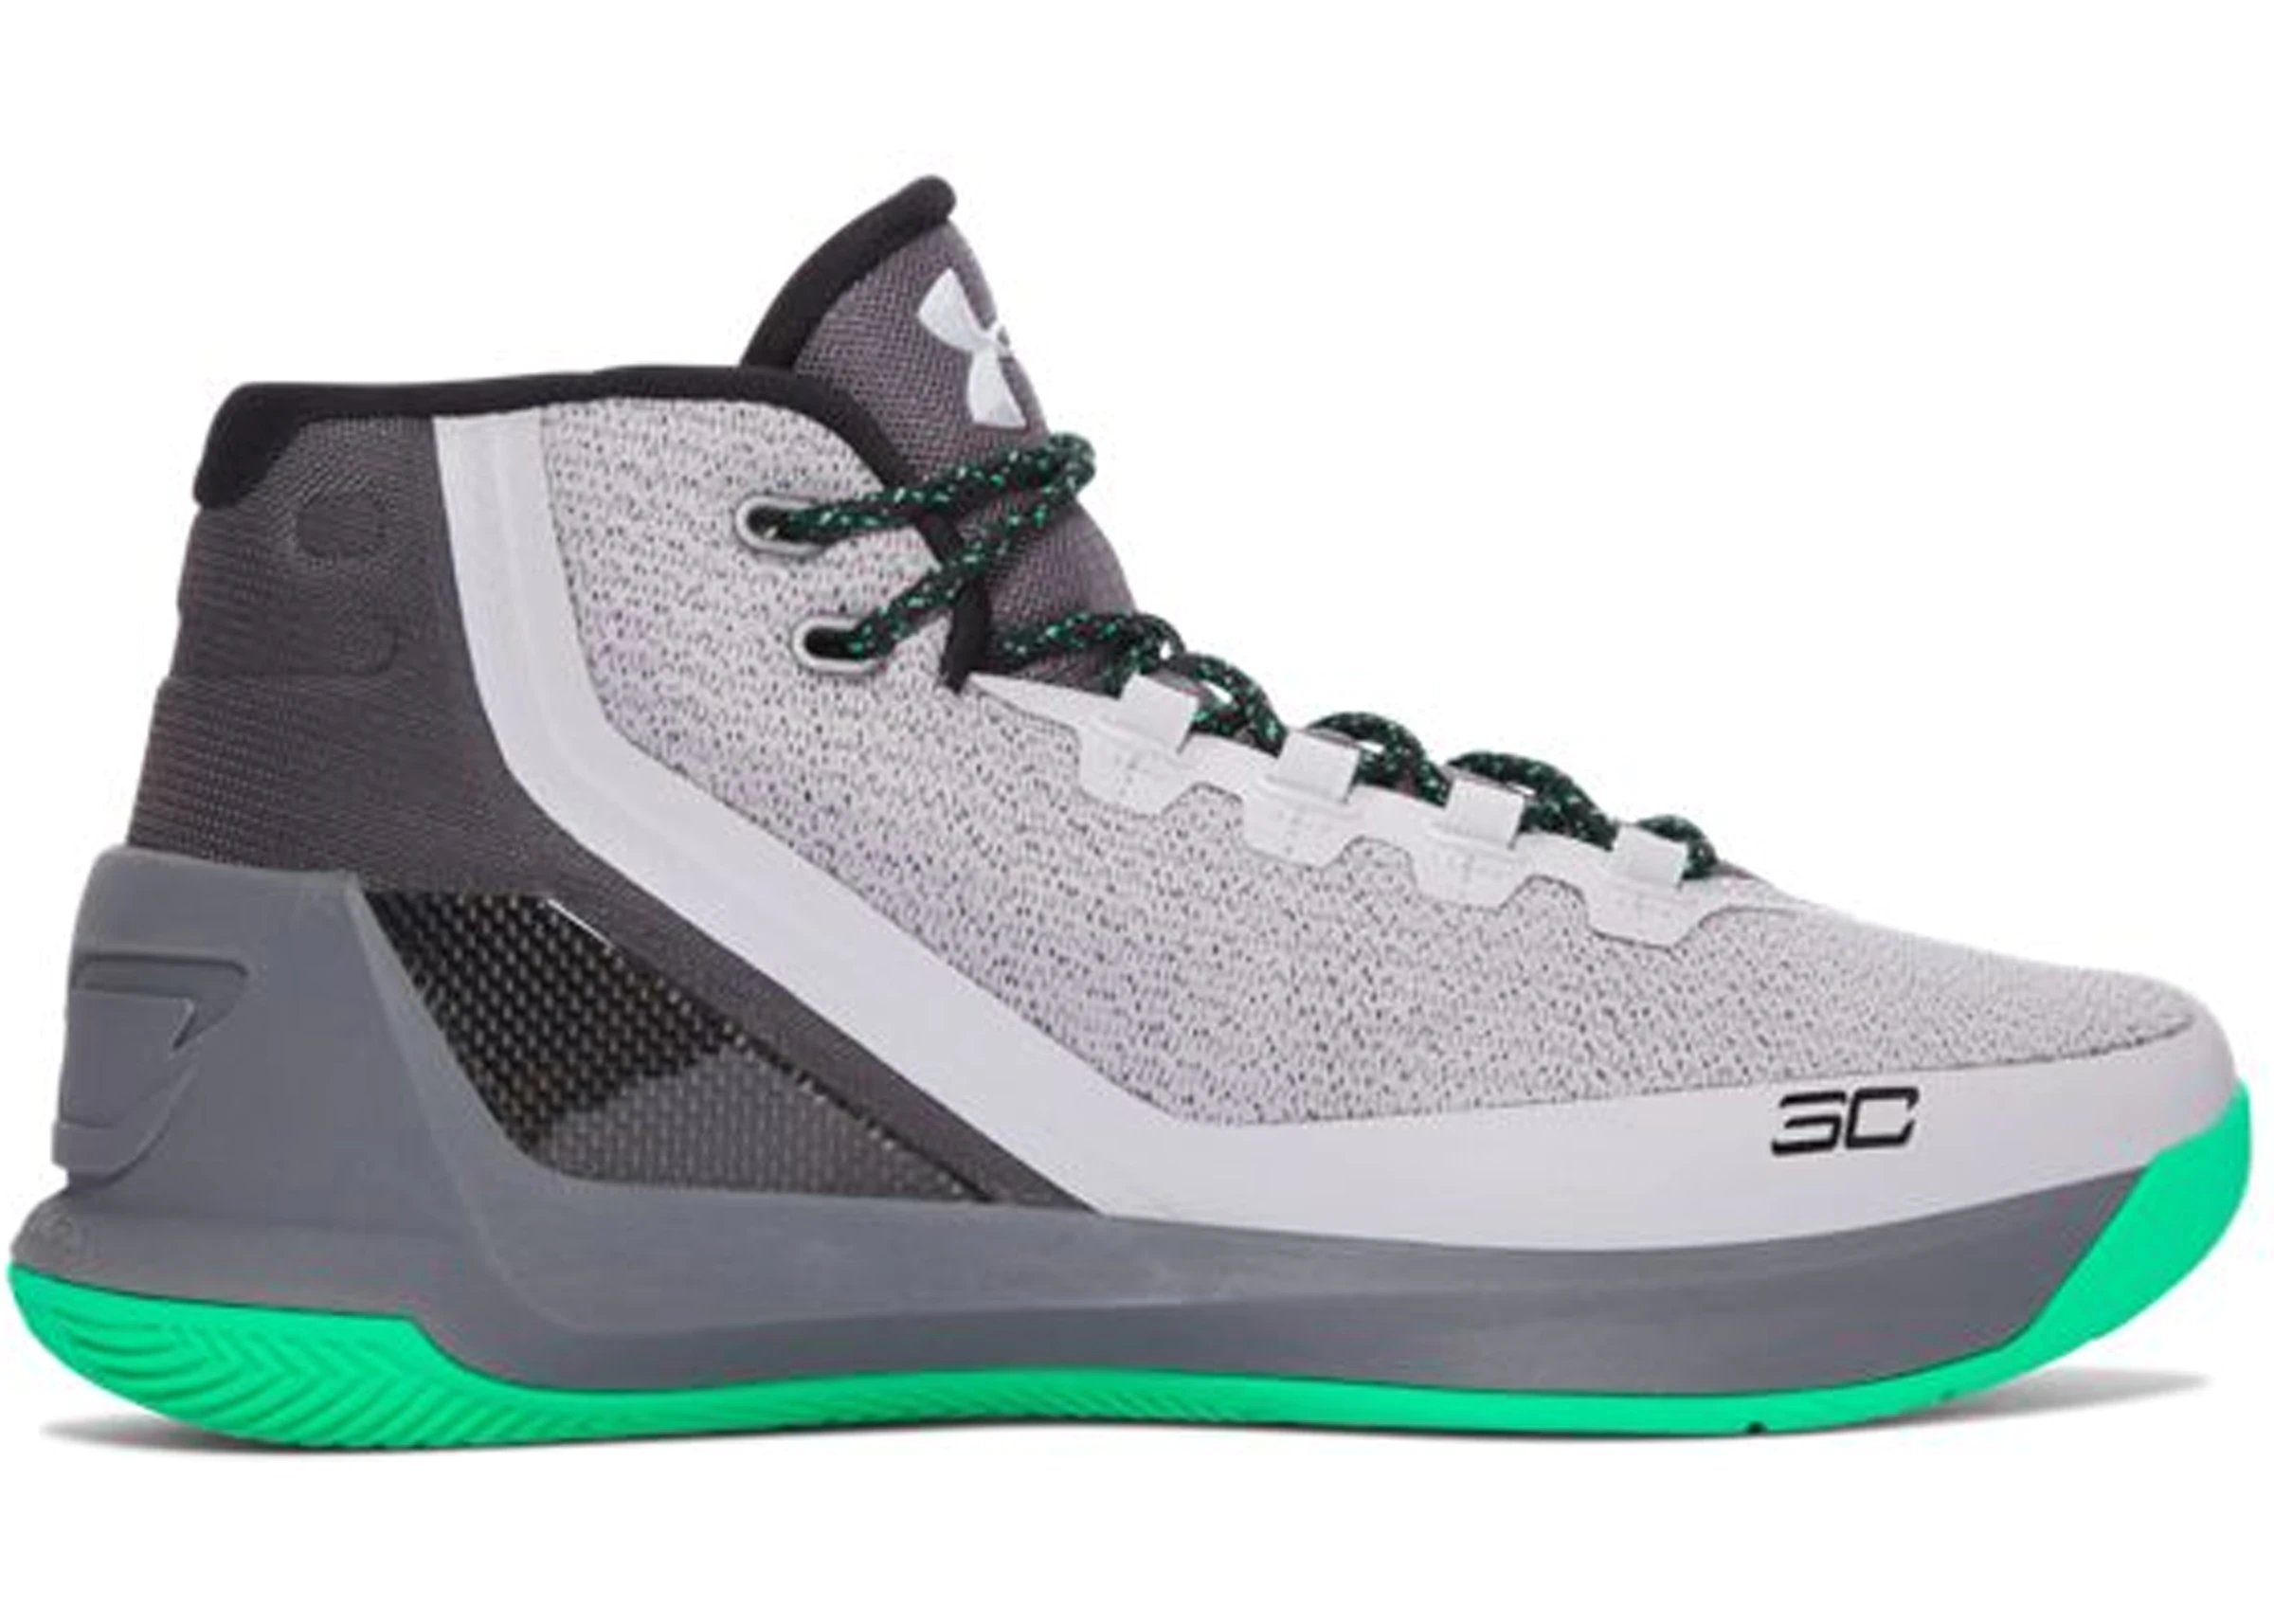 Under Armour Curry 3 Grey Matter Green - 1269279-289 - US